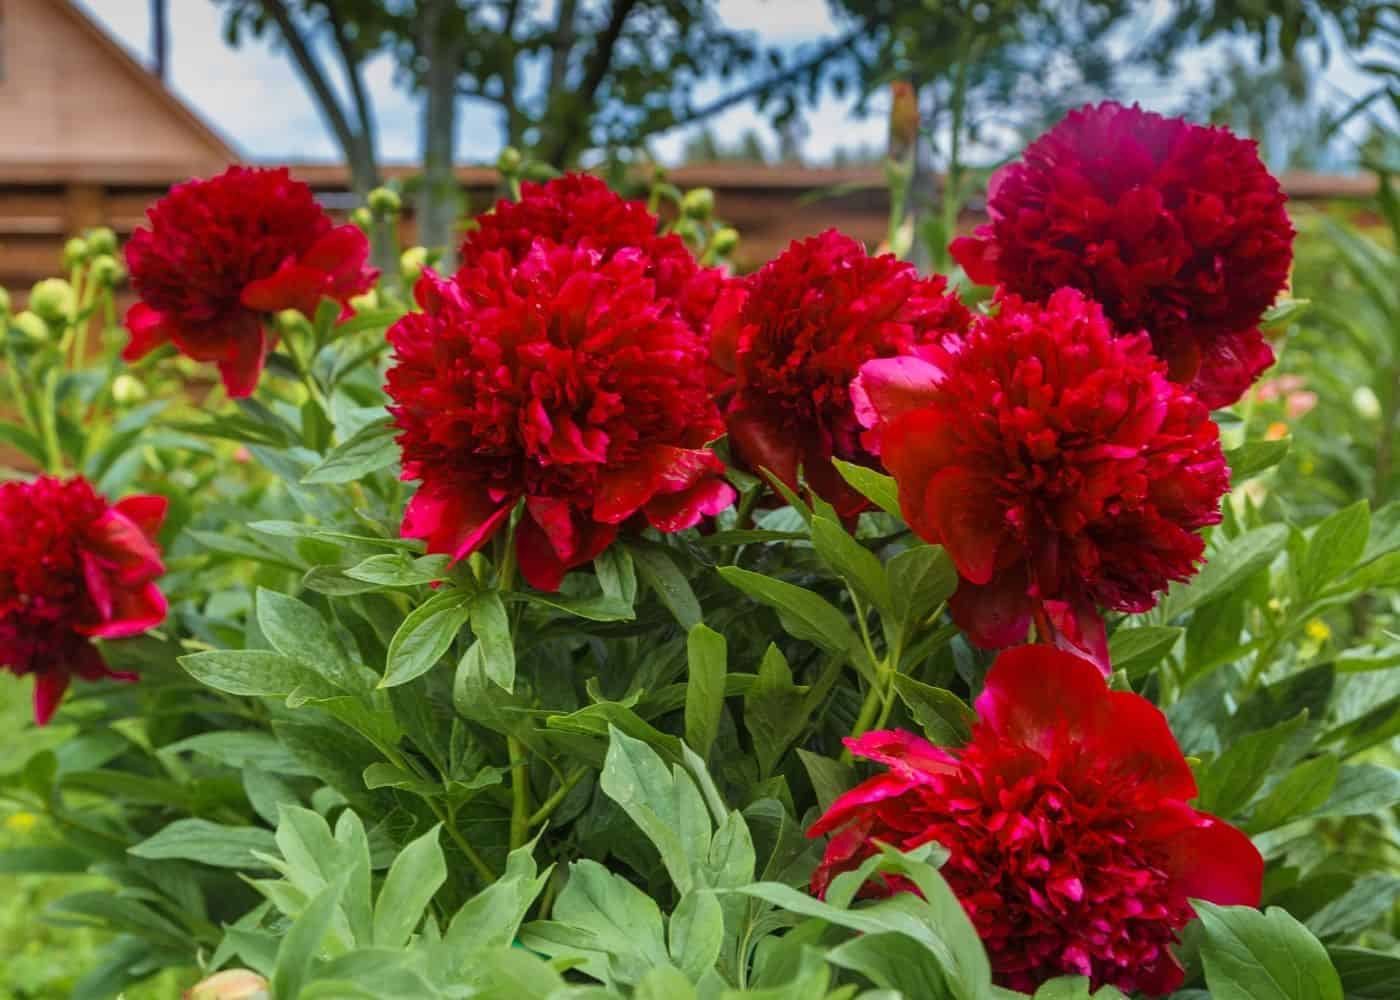 25 Red Peonies For A Vibrant Spring Floral Display | Home for the Harvest